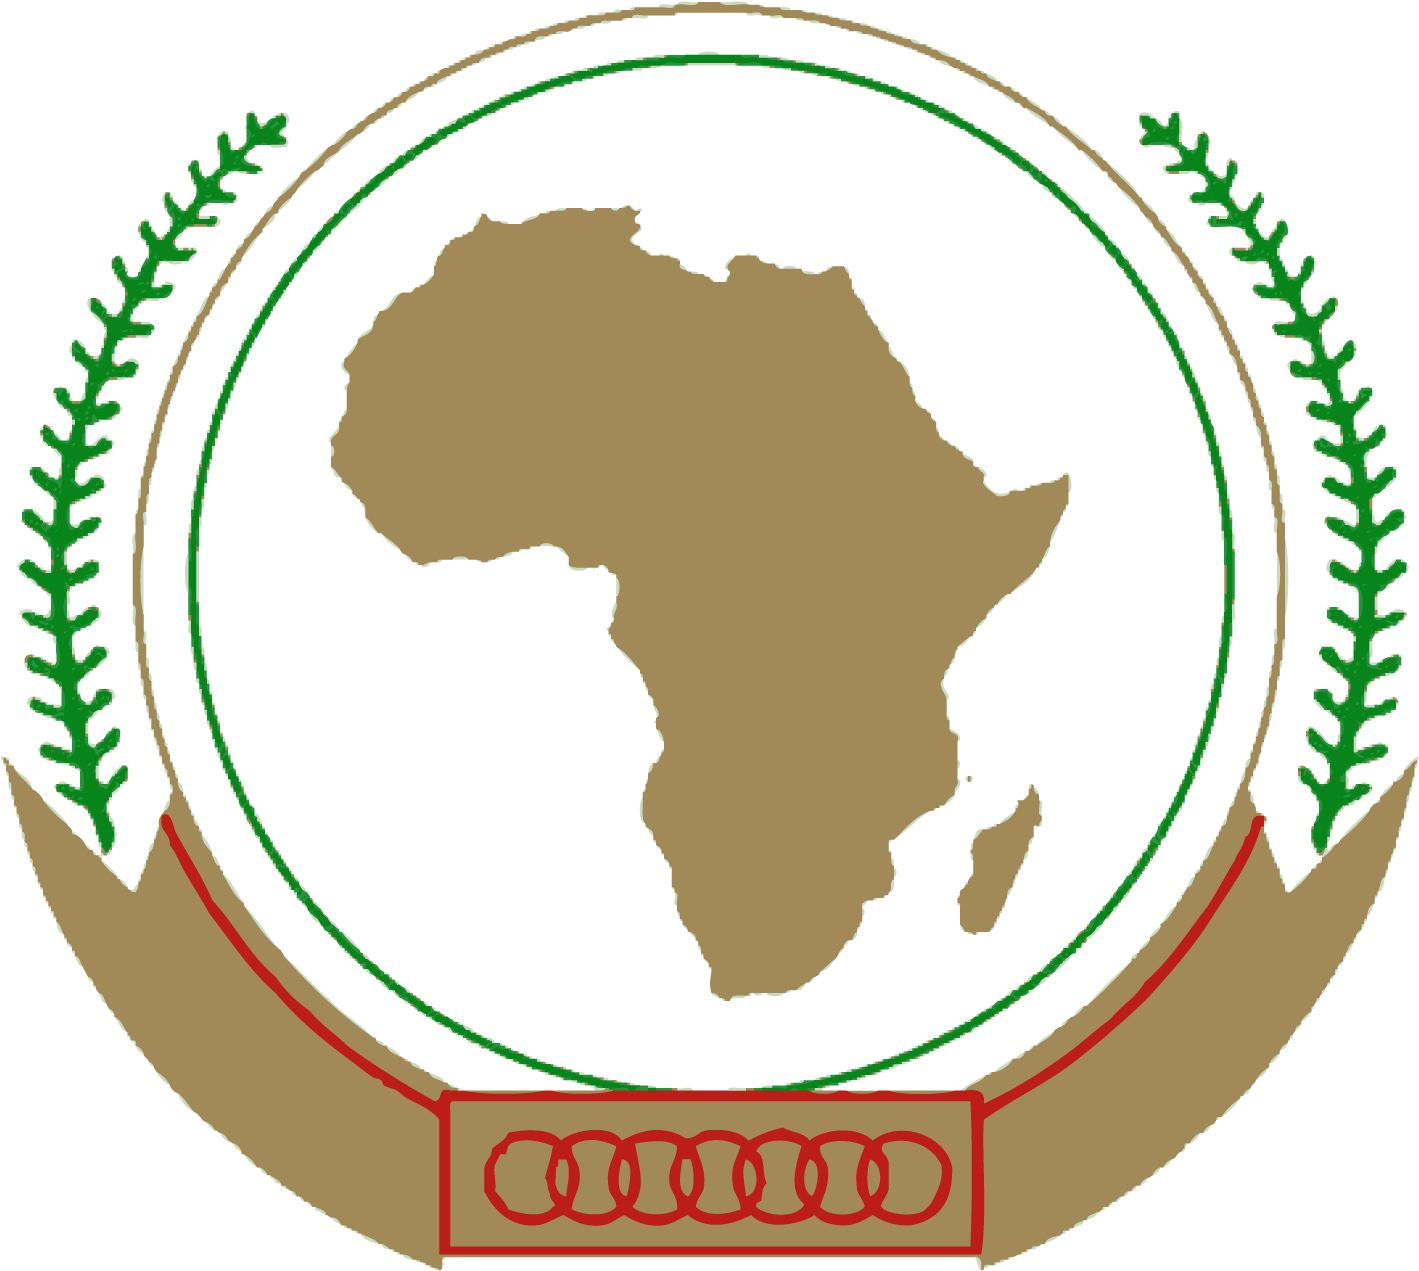 32023 Img Au Logo - African Union Logo 2016 (1818x1668), Png Download